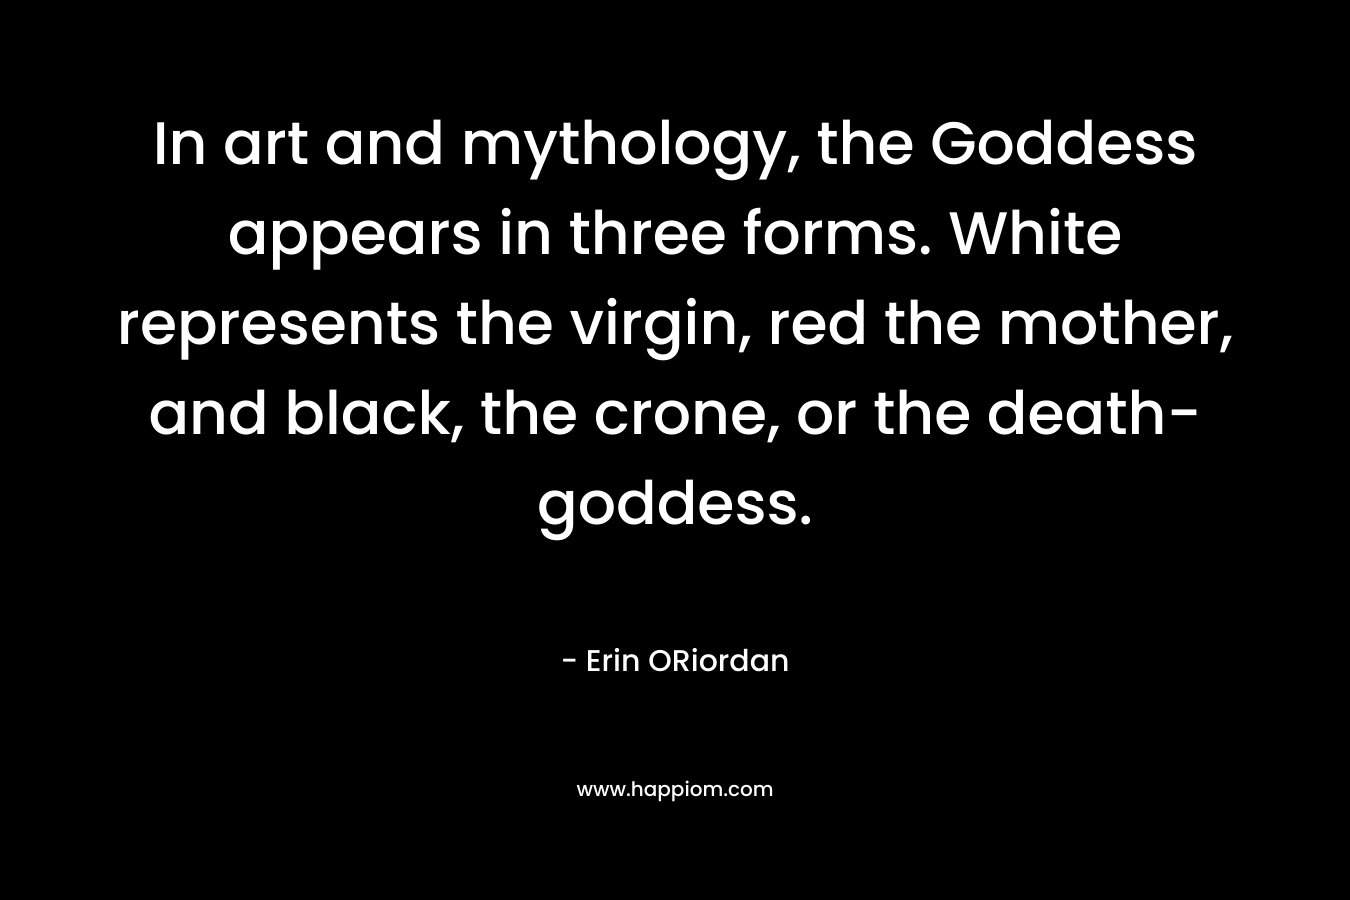 In art and mythology, the Goddess appears in three forms. White represents the virgin, red the mother, and black, the crone, or the death-goddess. – Erin ORiordan